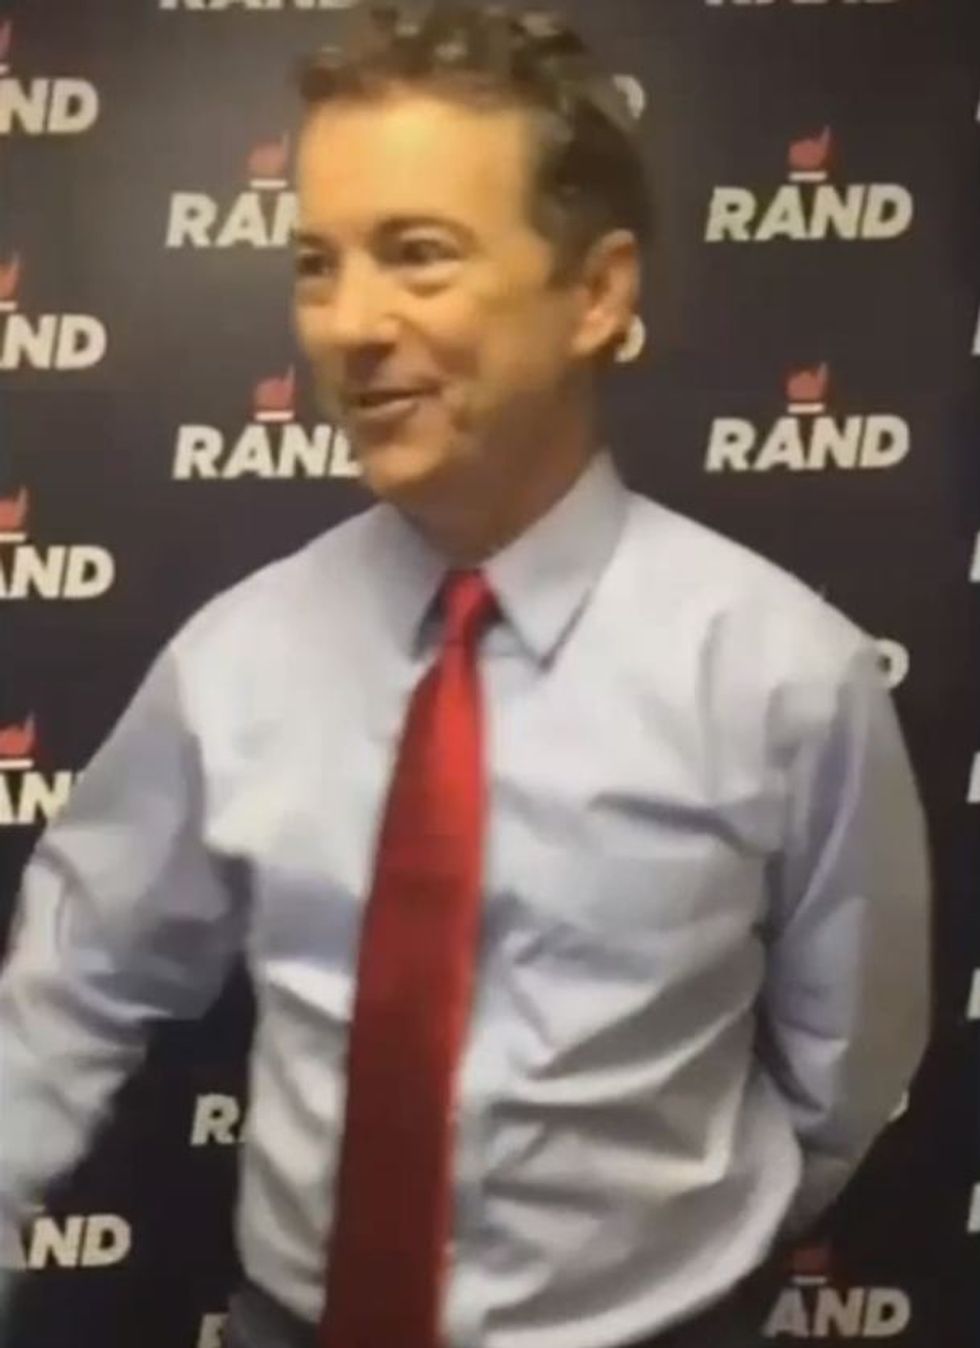 Some Say This Video Shows Rand Paul Walking Out on an Interview, but There's More to the Story